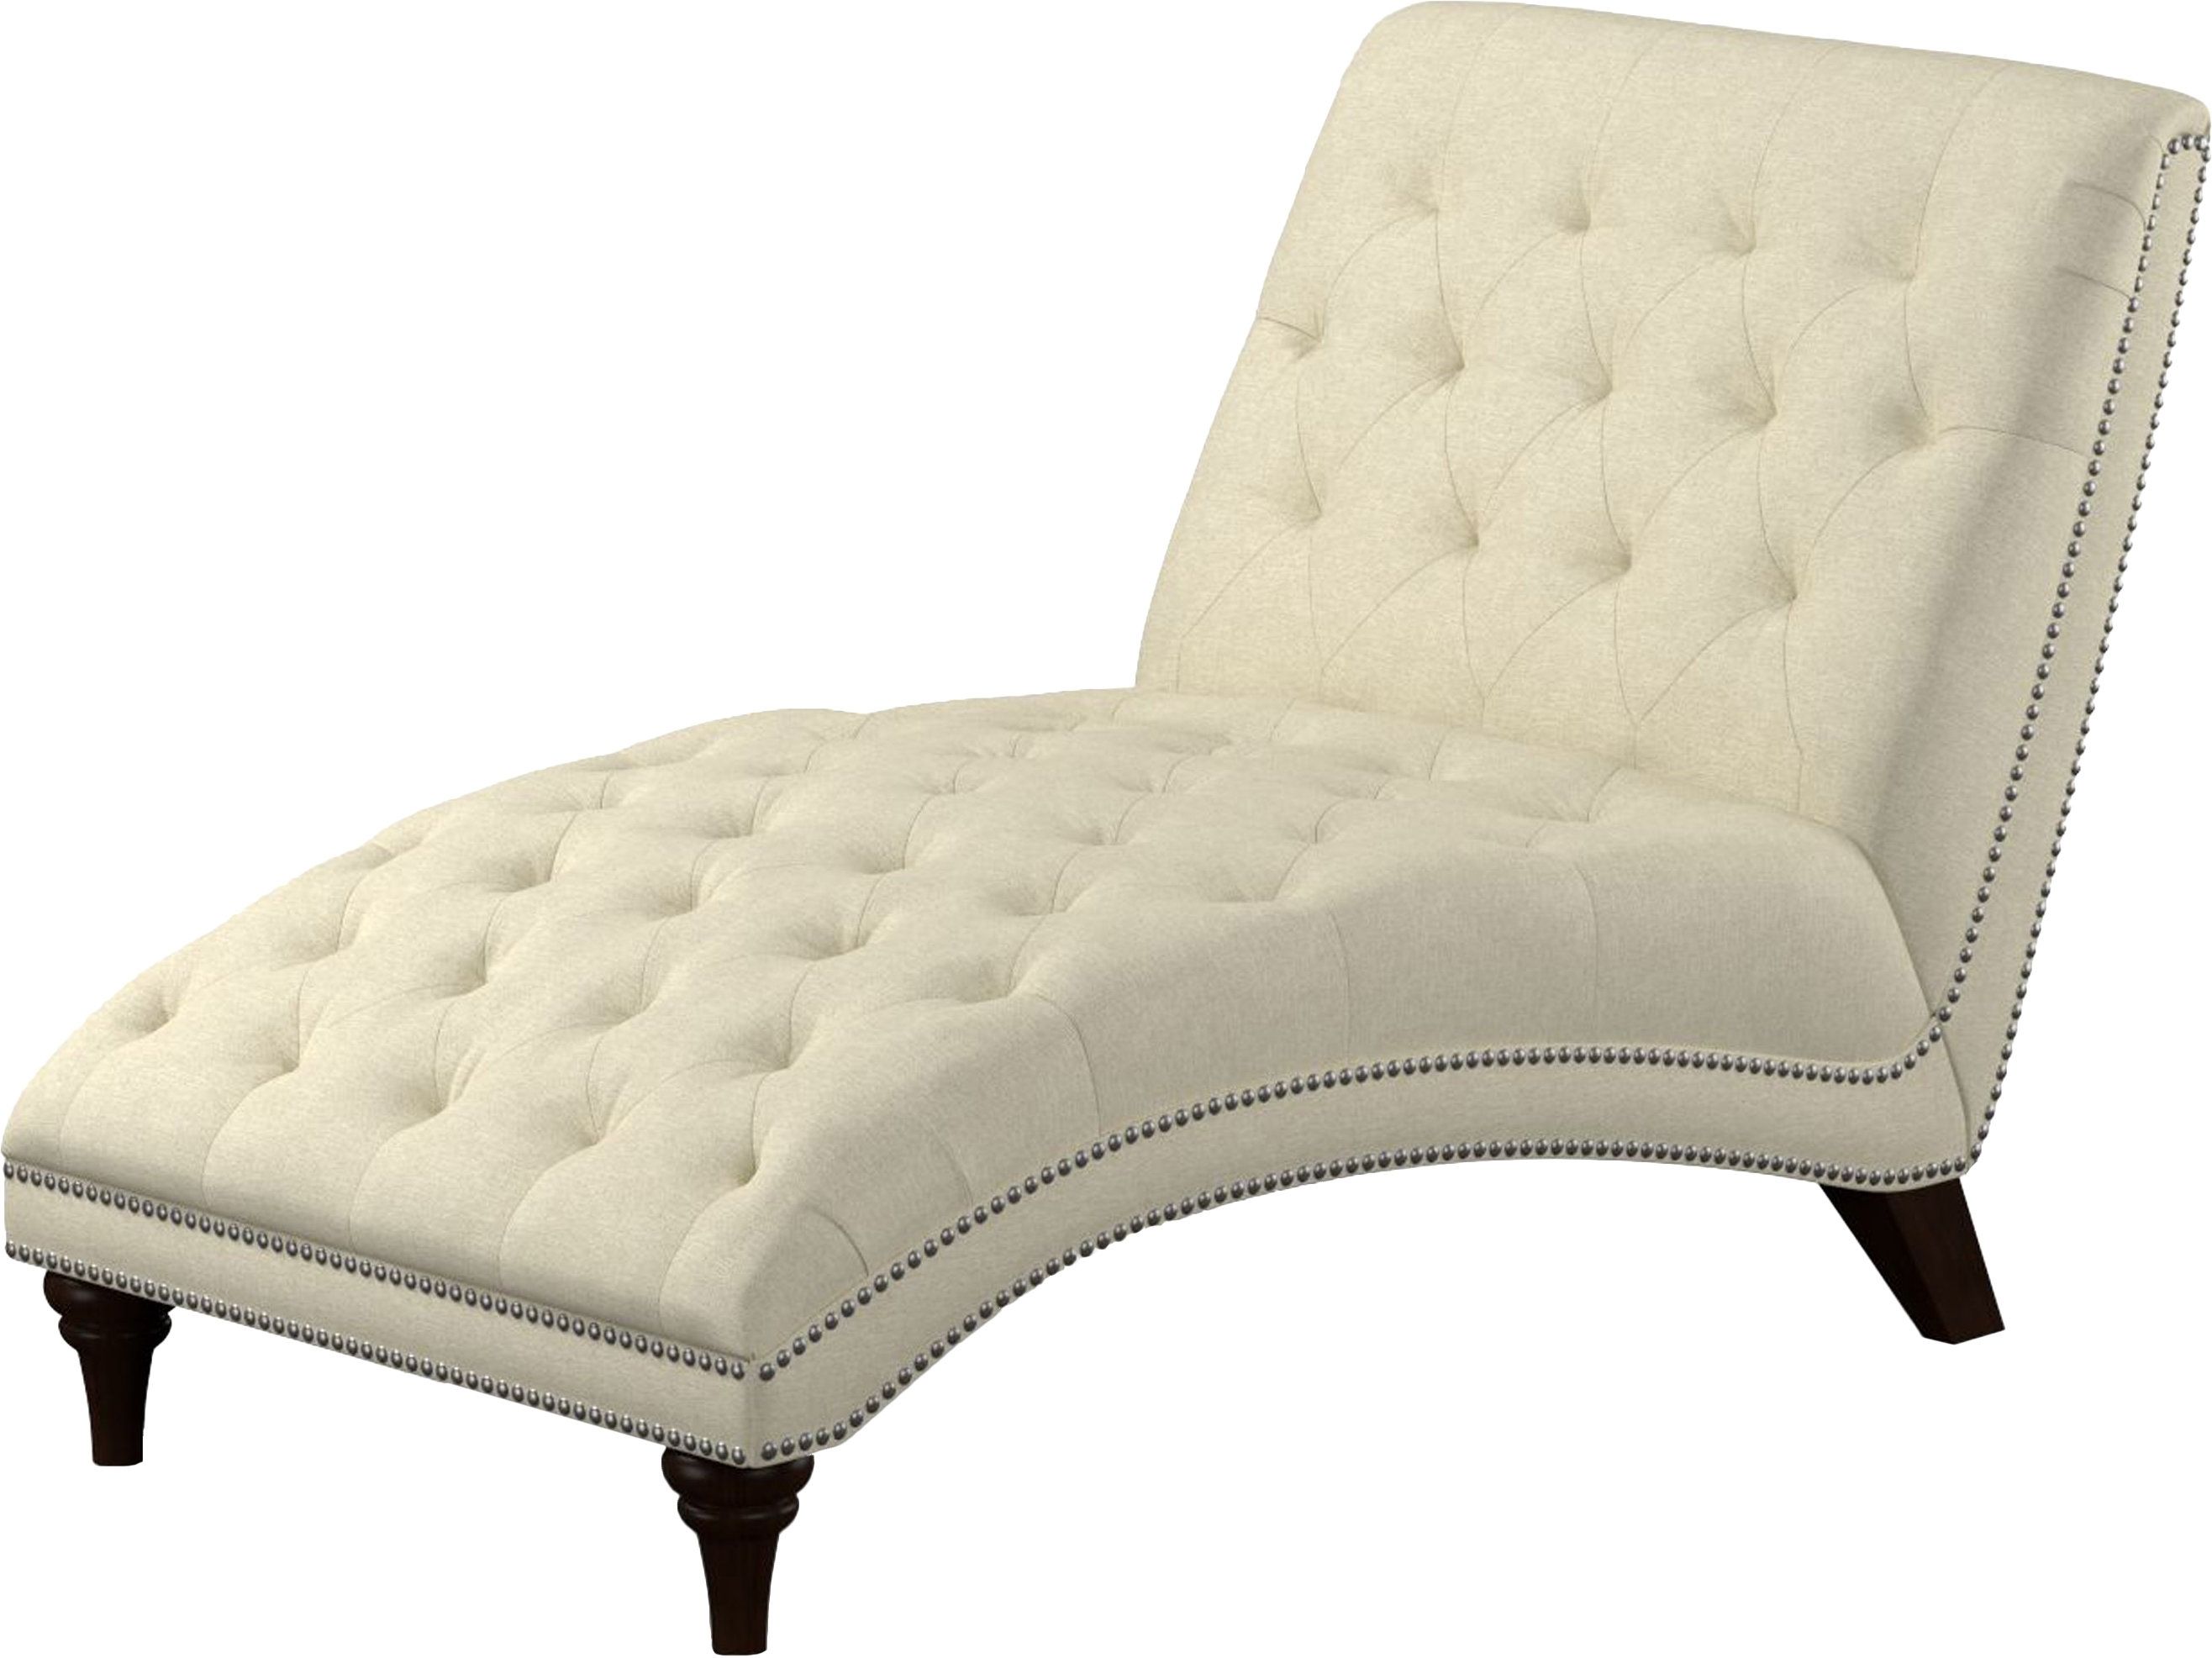 Round Chaise Lounges In Most Recently Released Traditional Chaise Lounge Chairs You Ll Love Wayfair Chase (View 14 of 15)